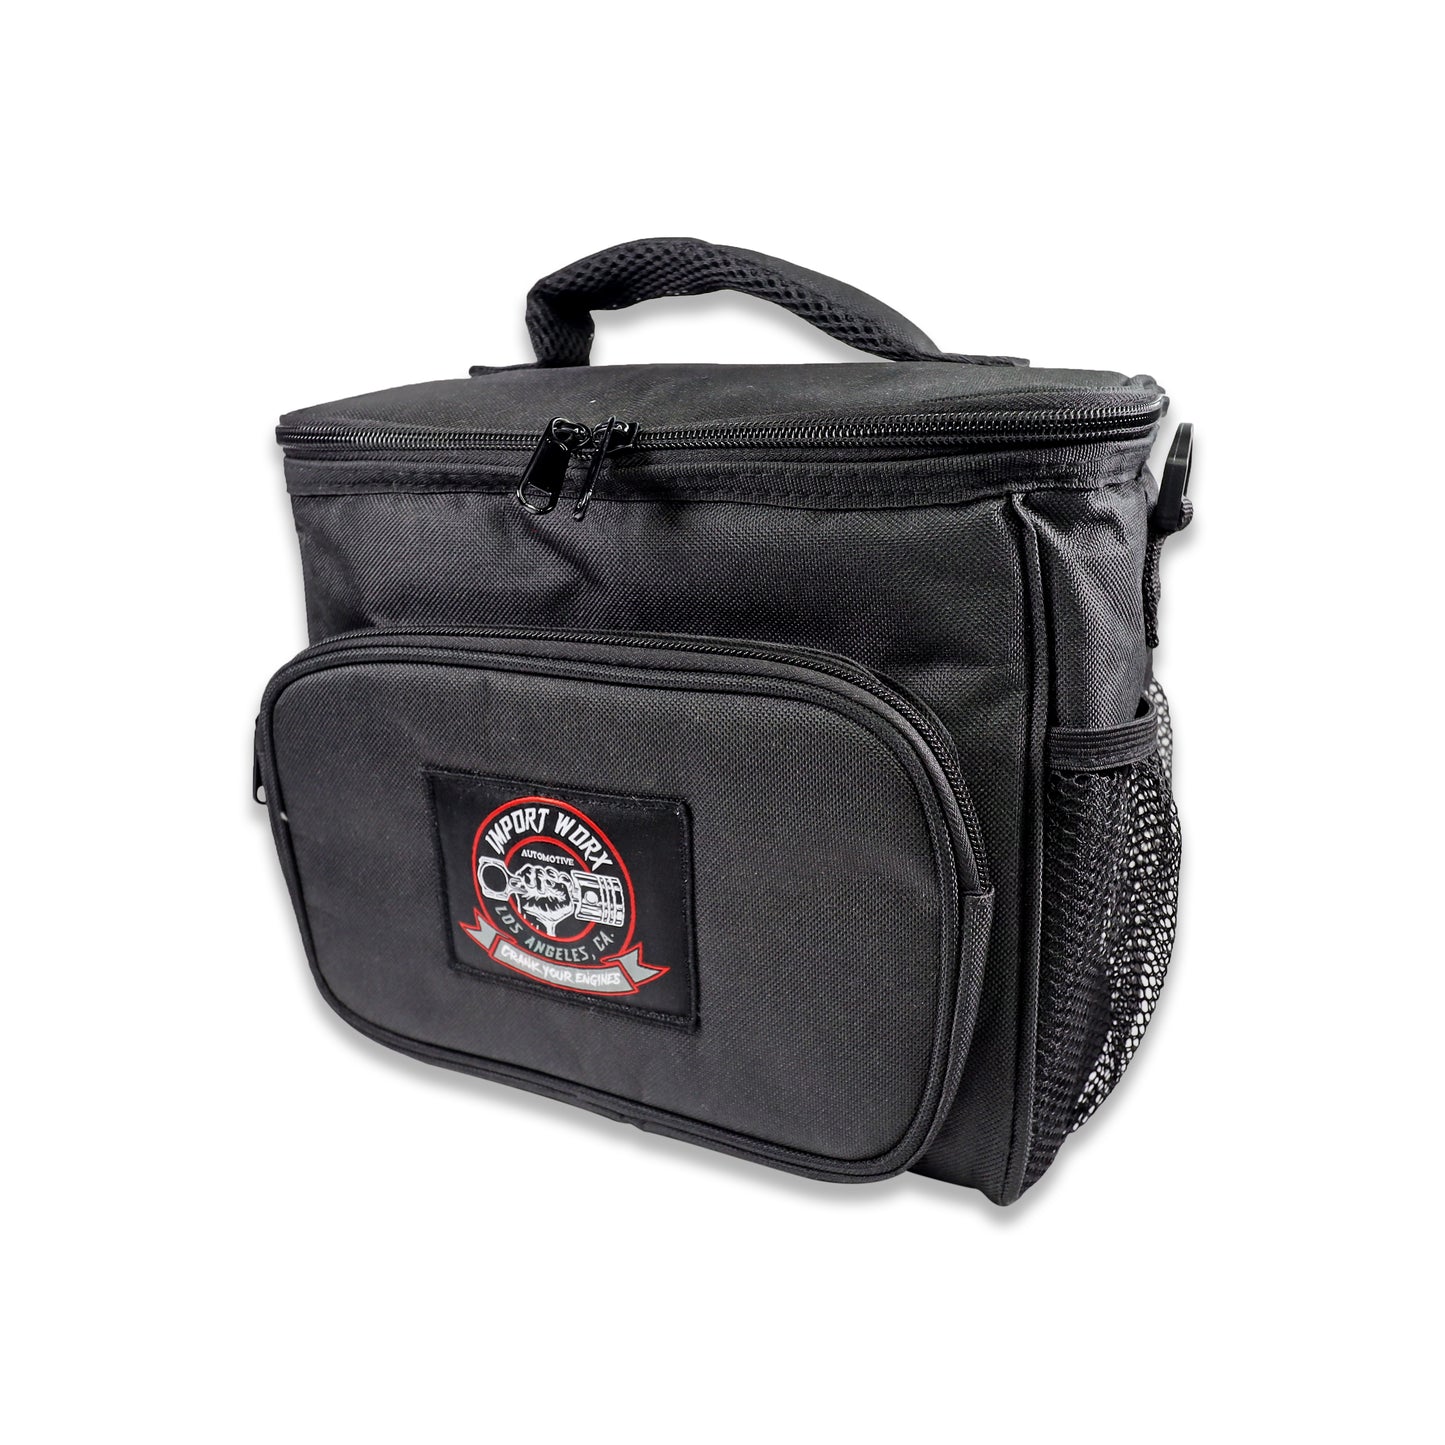 ImportWorx Black Piston Insulated Lunch Box Thermal Container